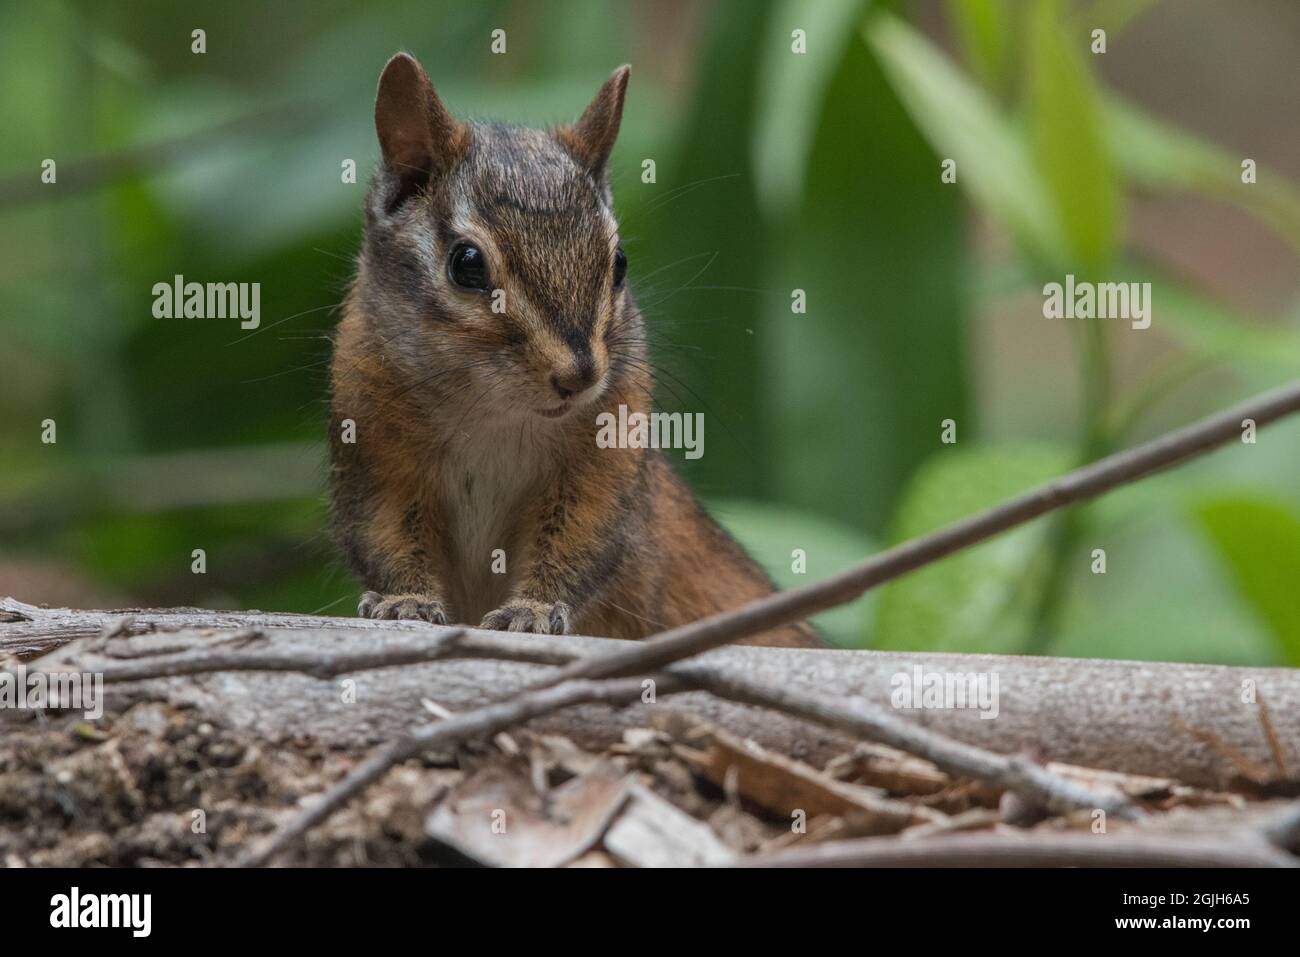 Sonoma chipmunk (Neotamias sonomae) a species of rodent endemic to California, this one was seen in Point Reyes National seashore in Marin county. Stock Photo